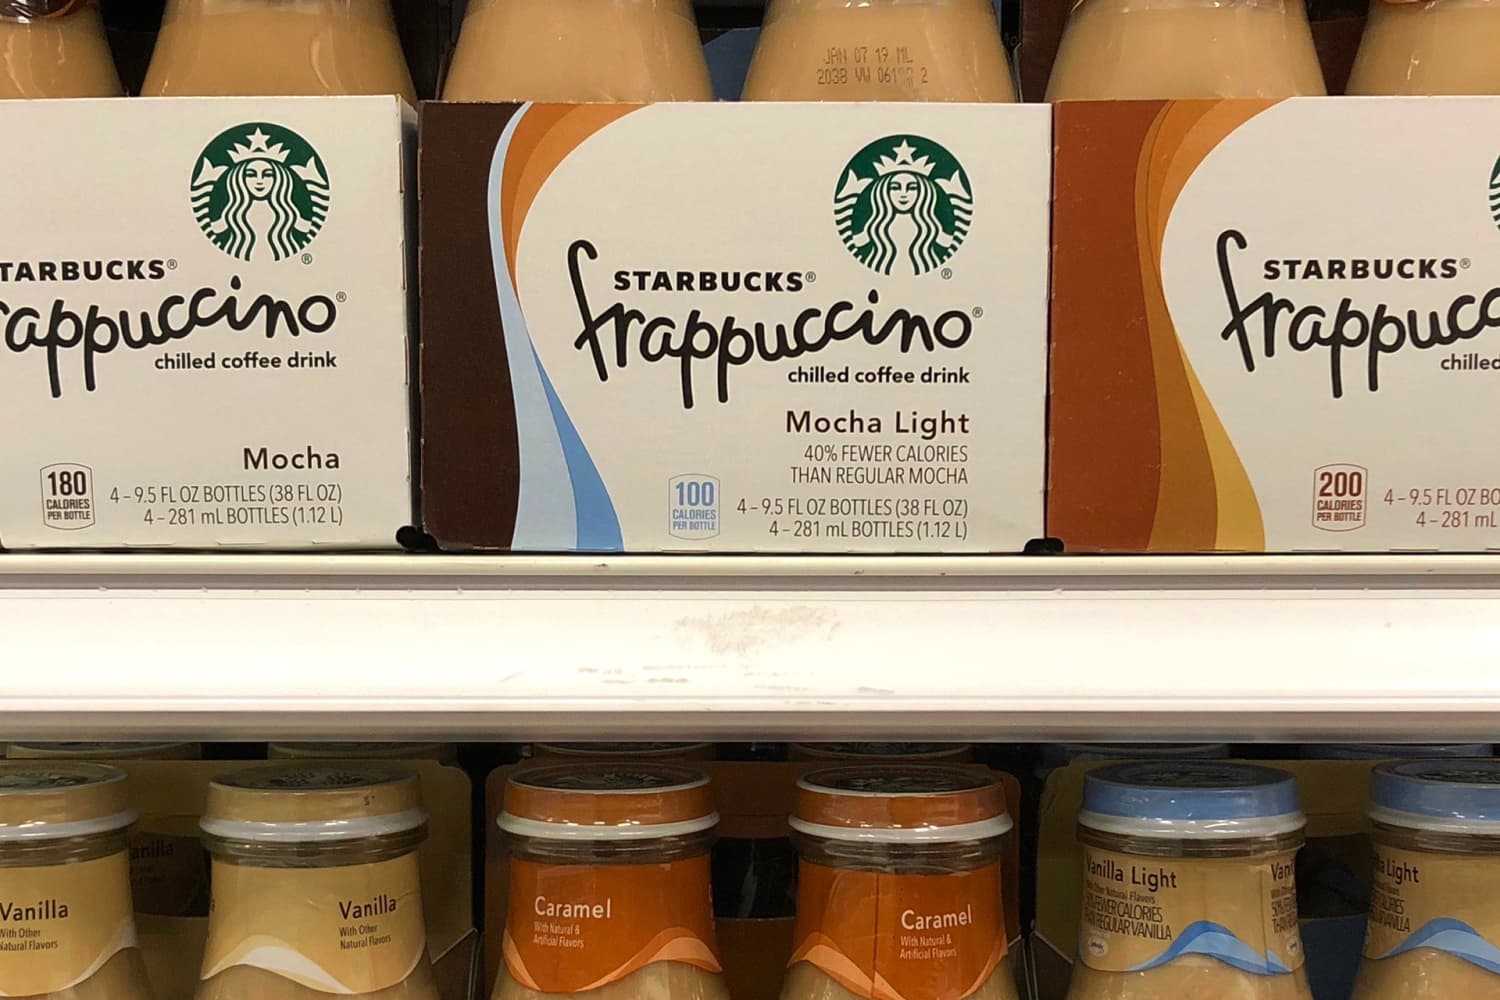 Starbucks Vanilla Frappuccino bottles recalled due to some drinks possibly  containing glass - Good Morning America